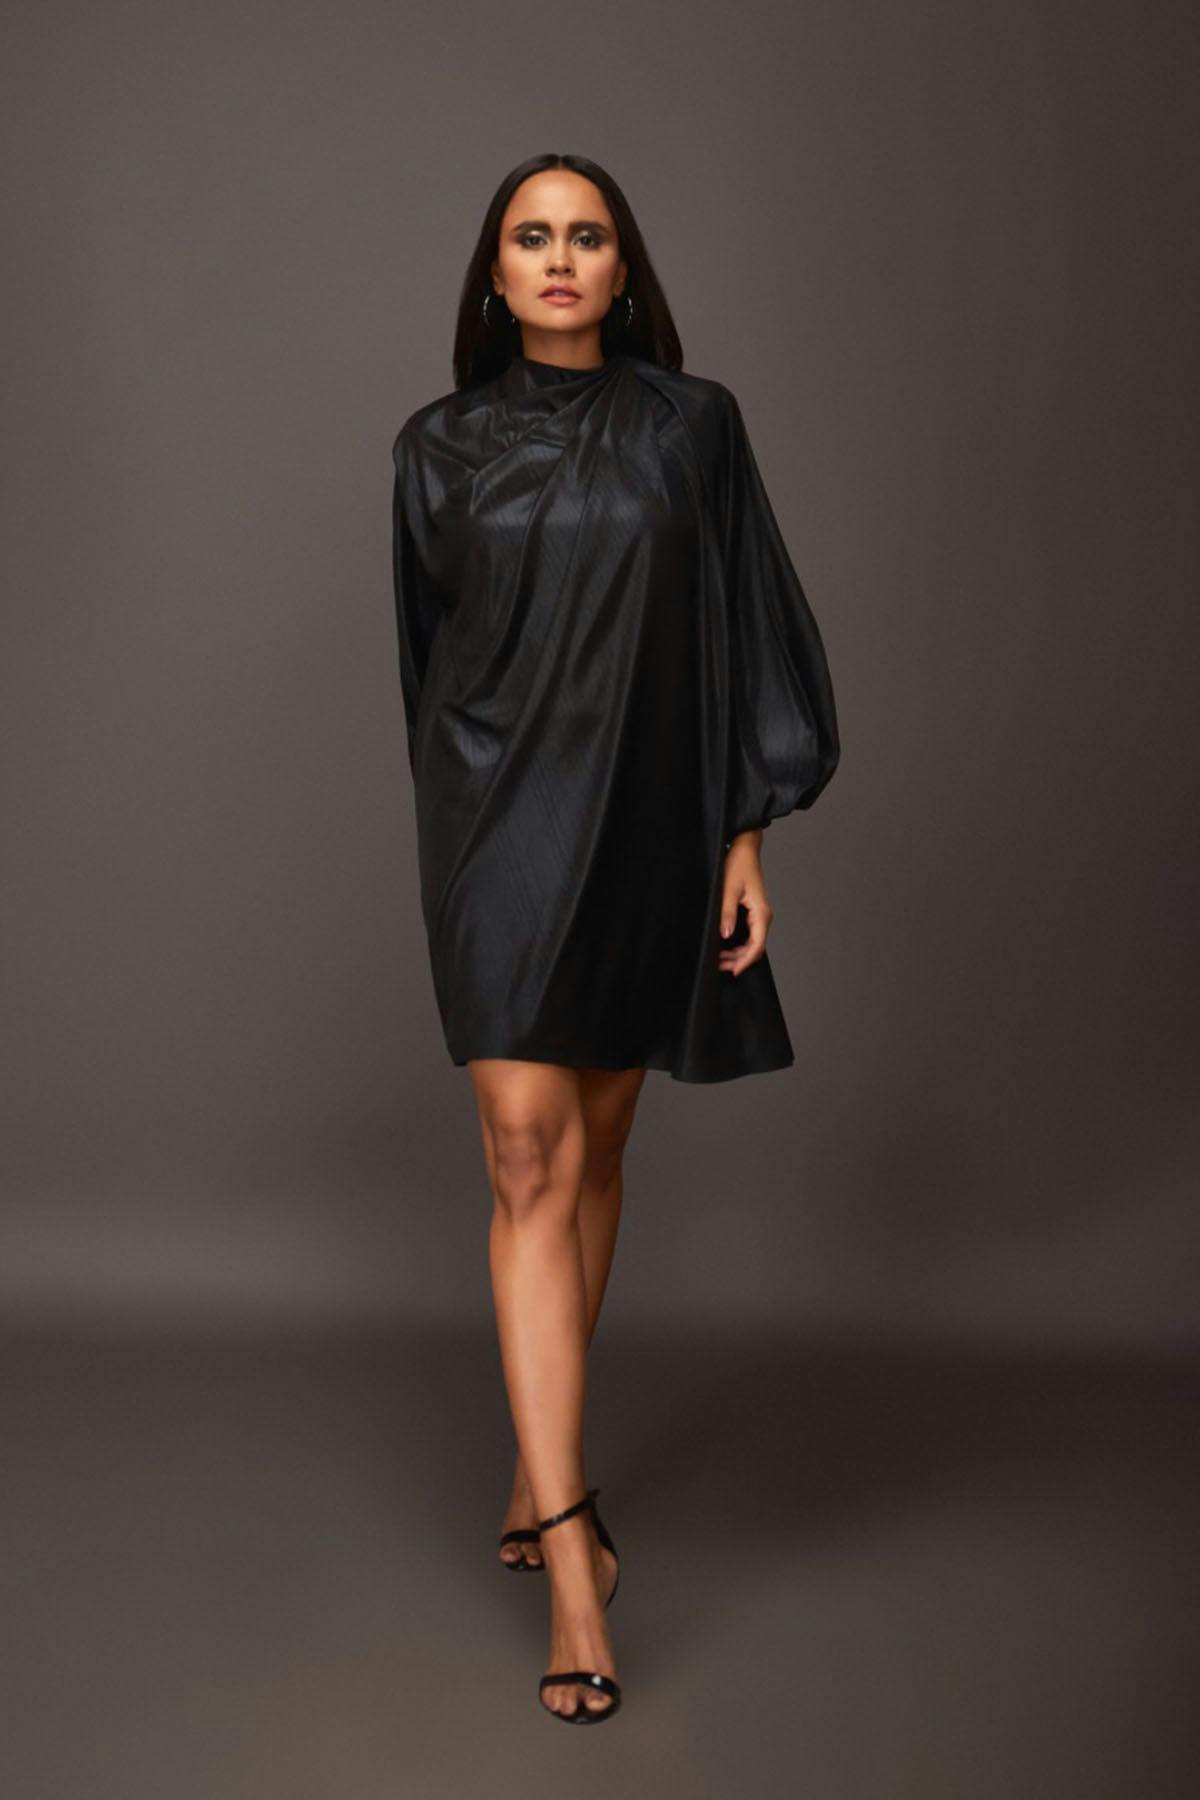 LH-1116 - Black Close Neck With Pleating Detail Metallic Foil Short Dress, a product by Deepika Arora